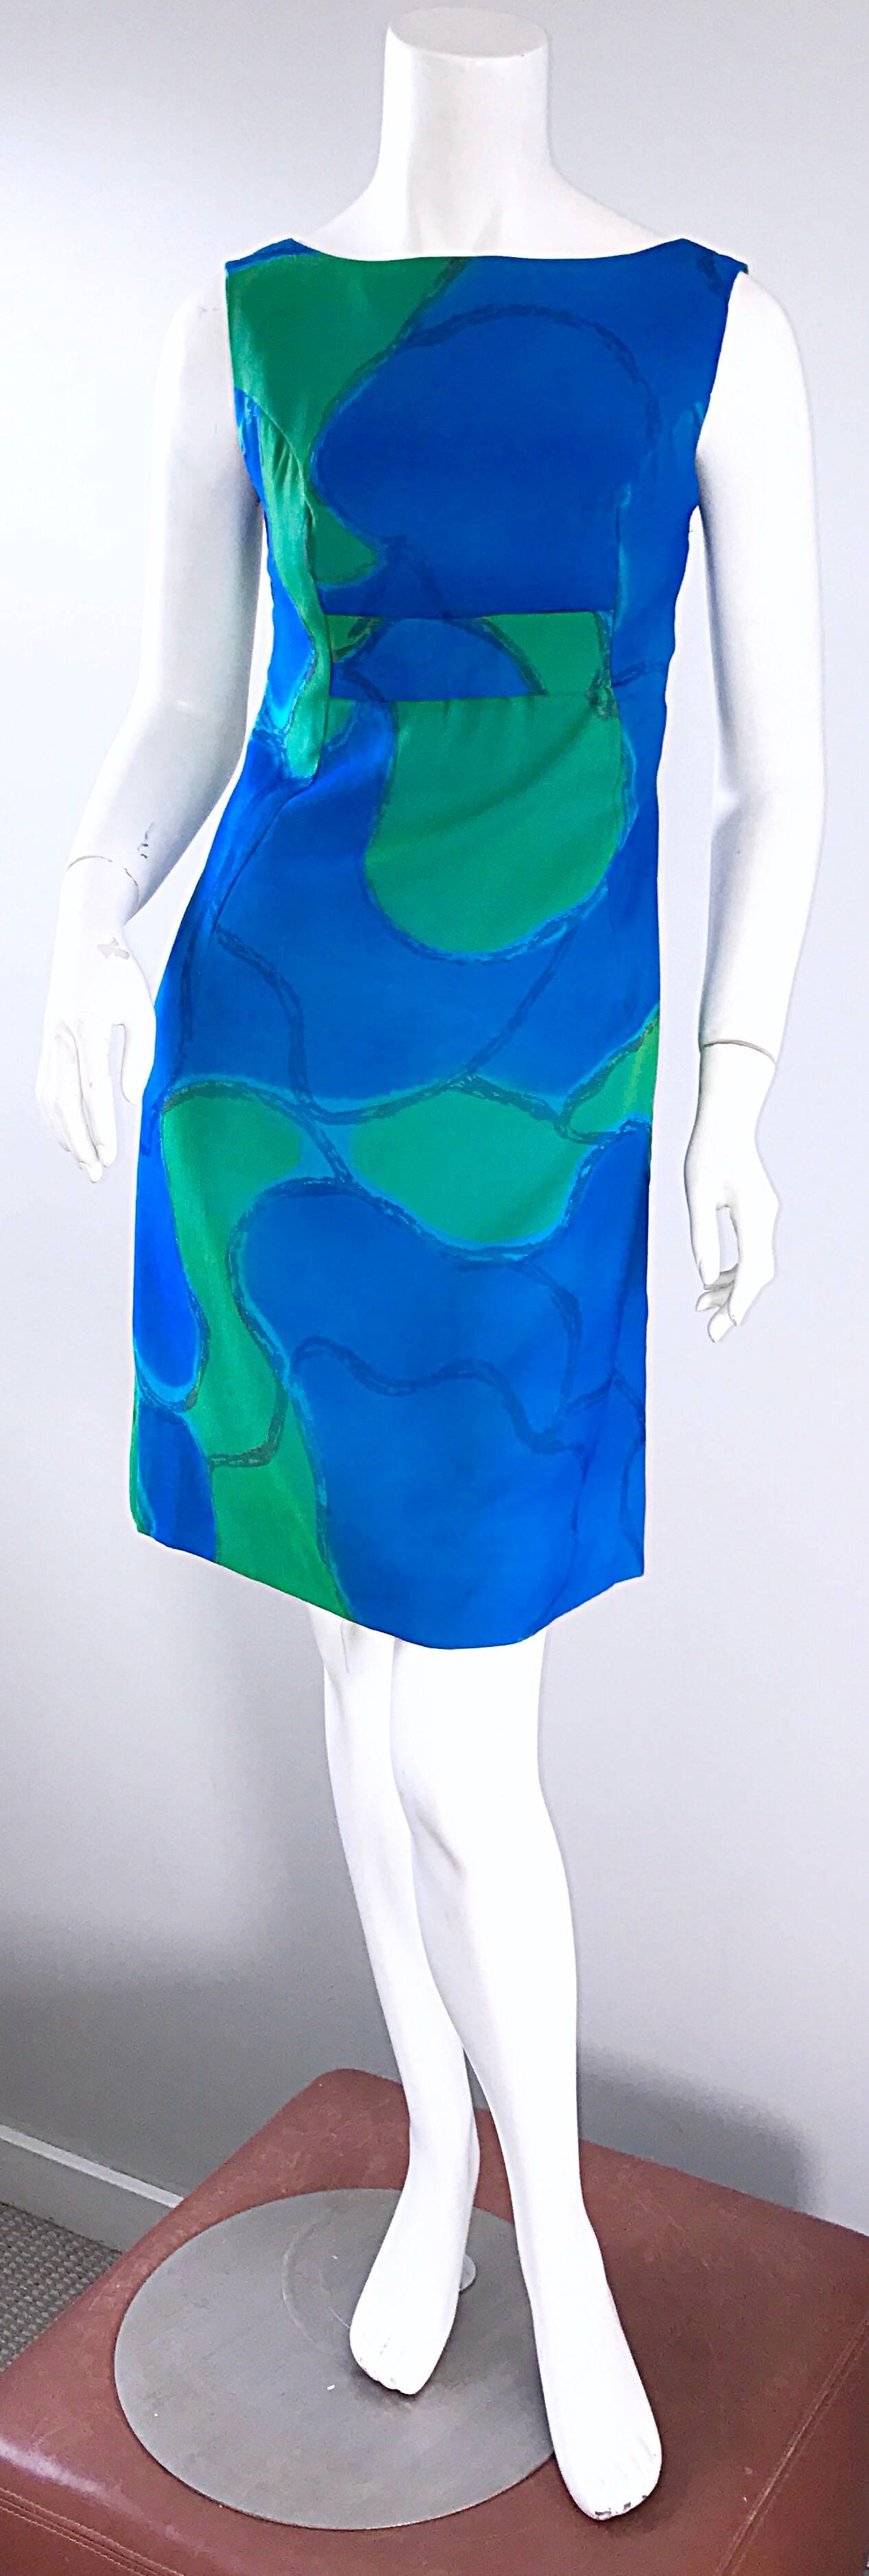 Chic 1960s Turquoise Blue and Green Watercolor Chiffon Demi Couture Shift Dress In Excellent Condition For Sale In San Diego, CA